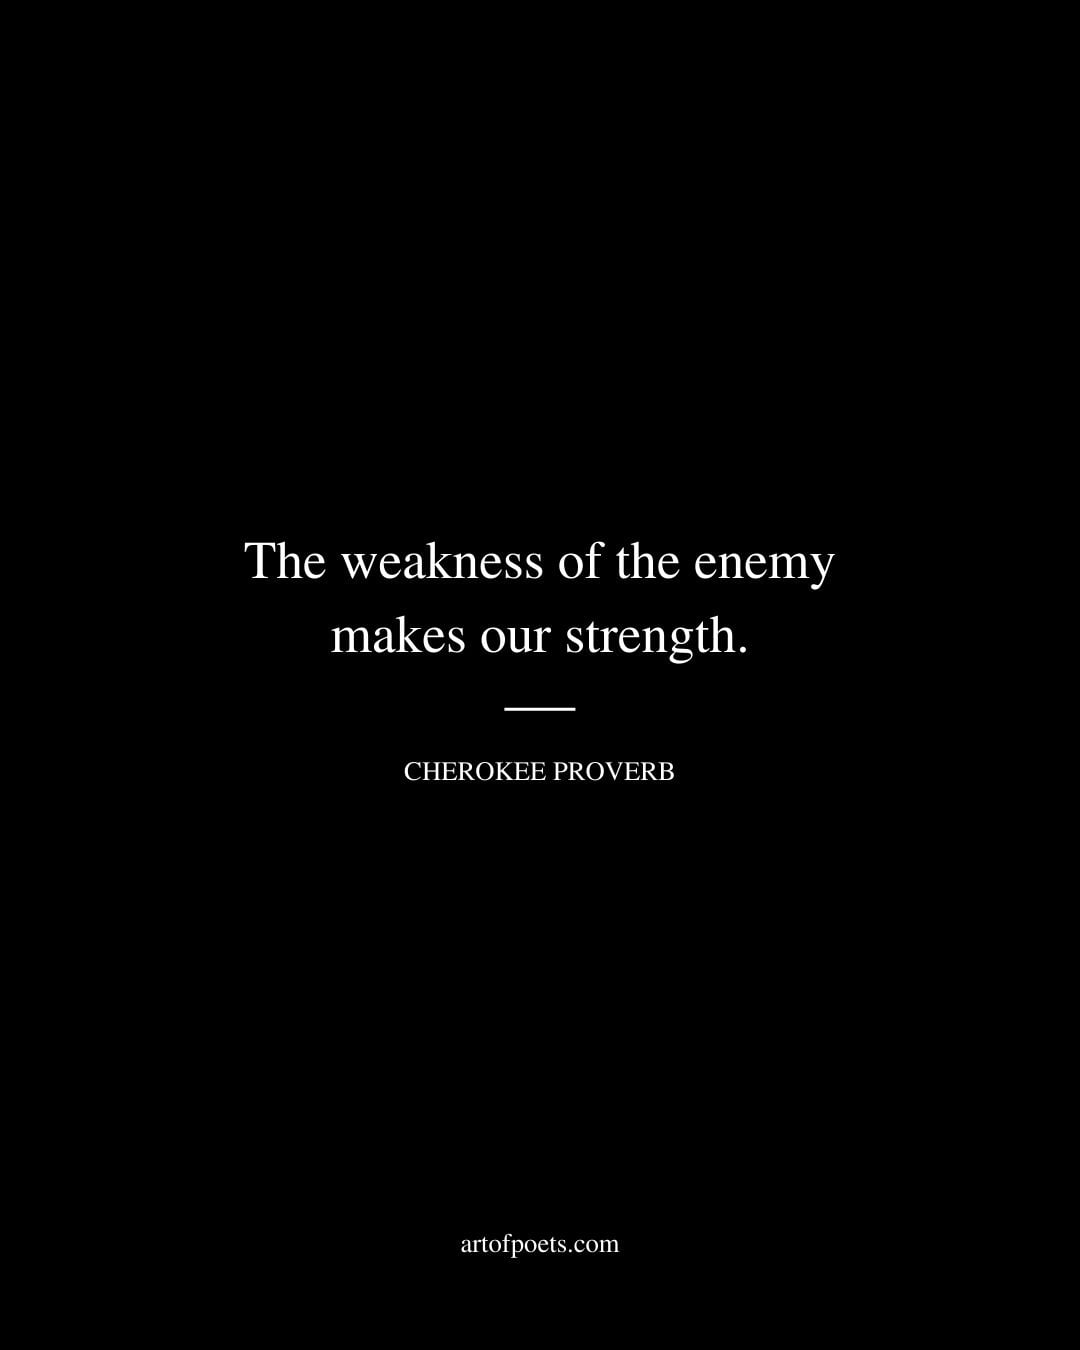 The weakness of the enemy makes our strength